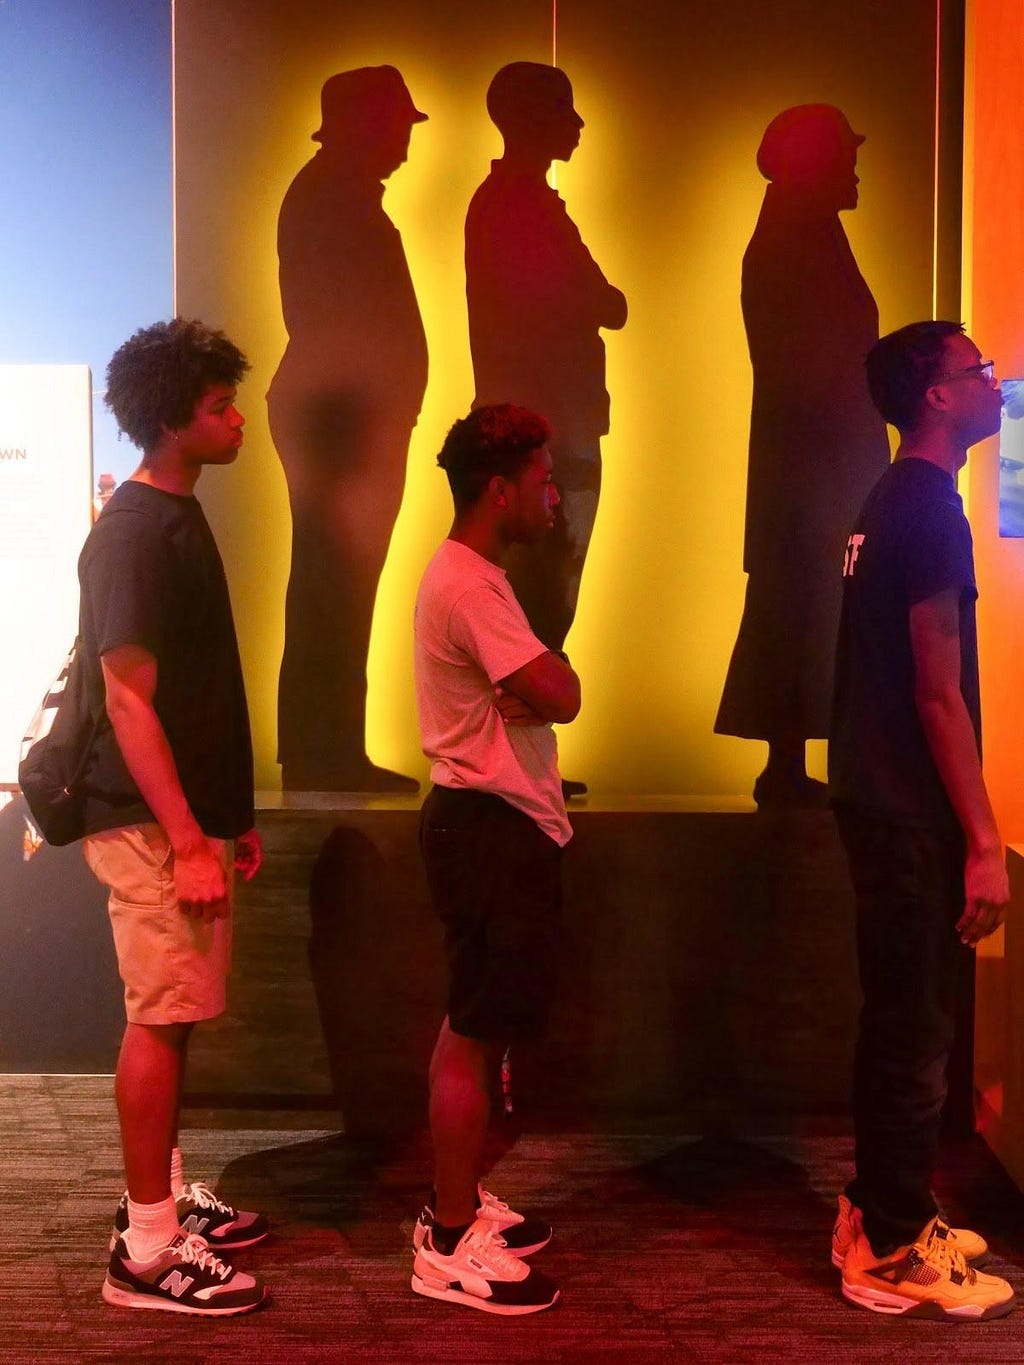 Photograph of three Black teens standing sideways in front of a display that includes three black silhouettes against a yellow background.